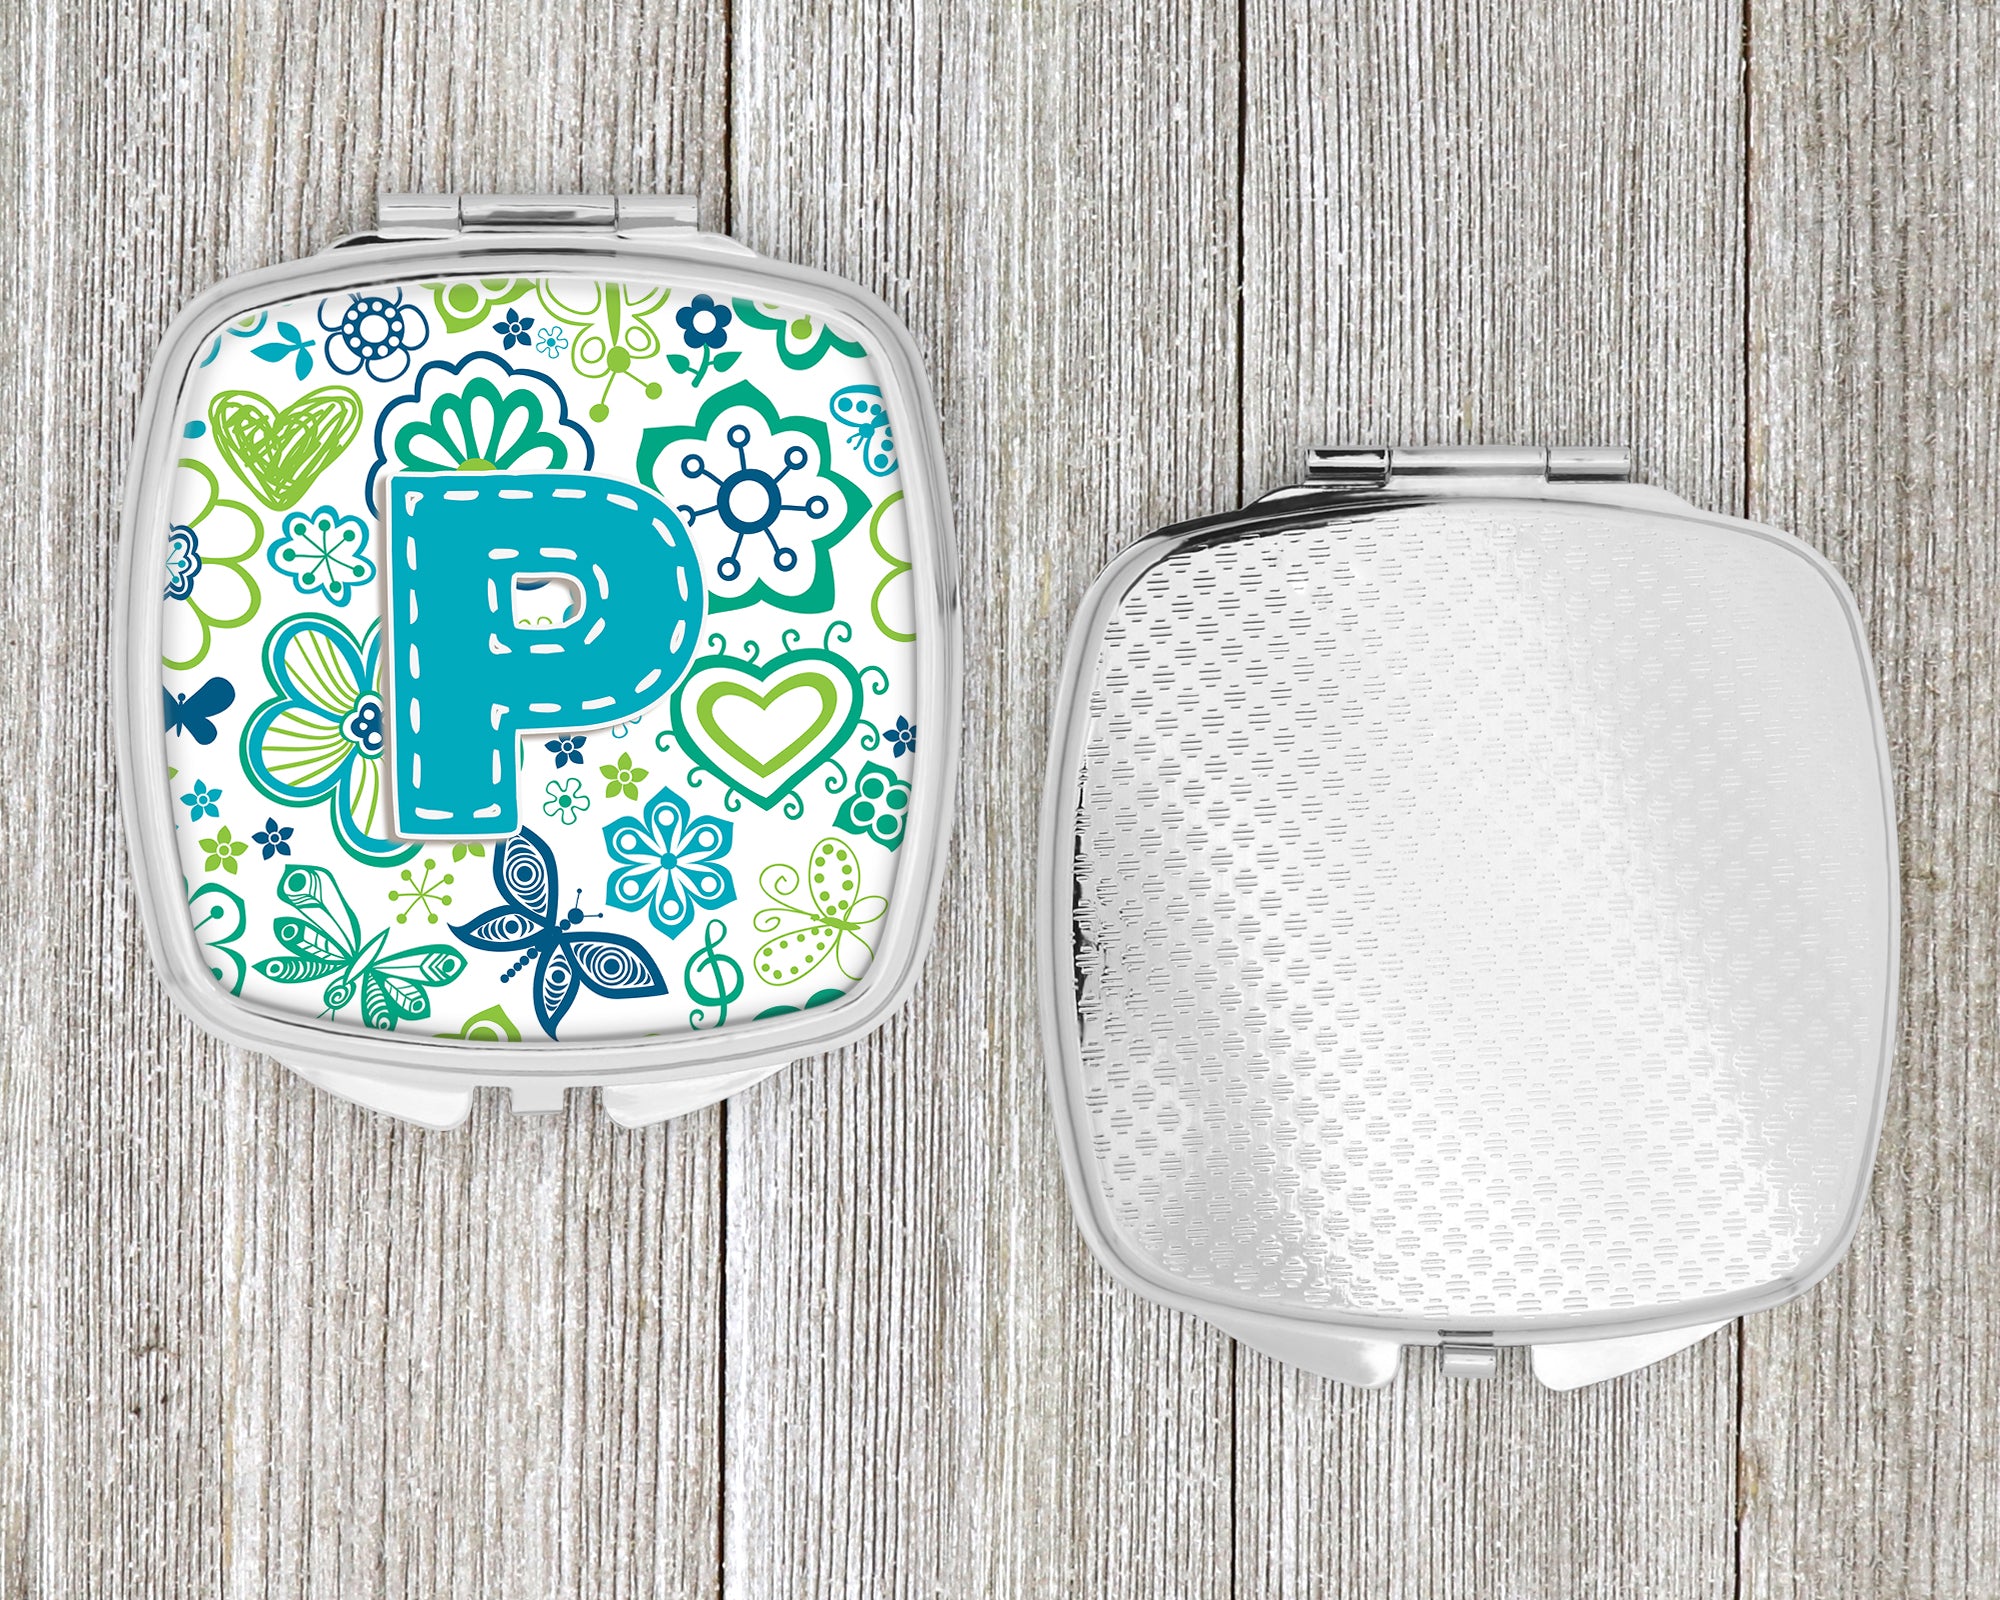 Letter P Flowers and Butterflies Teal Blue Compact Mirror CJ2006-PSCM